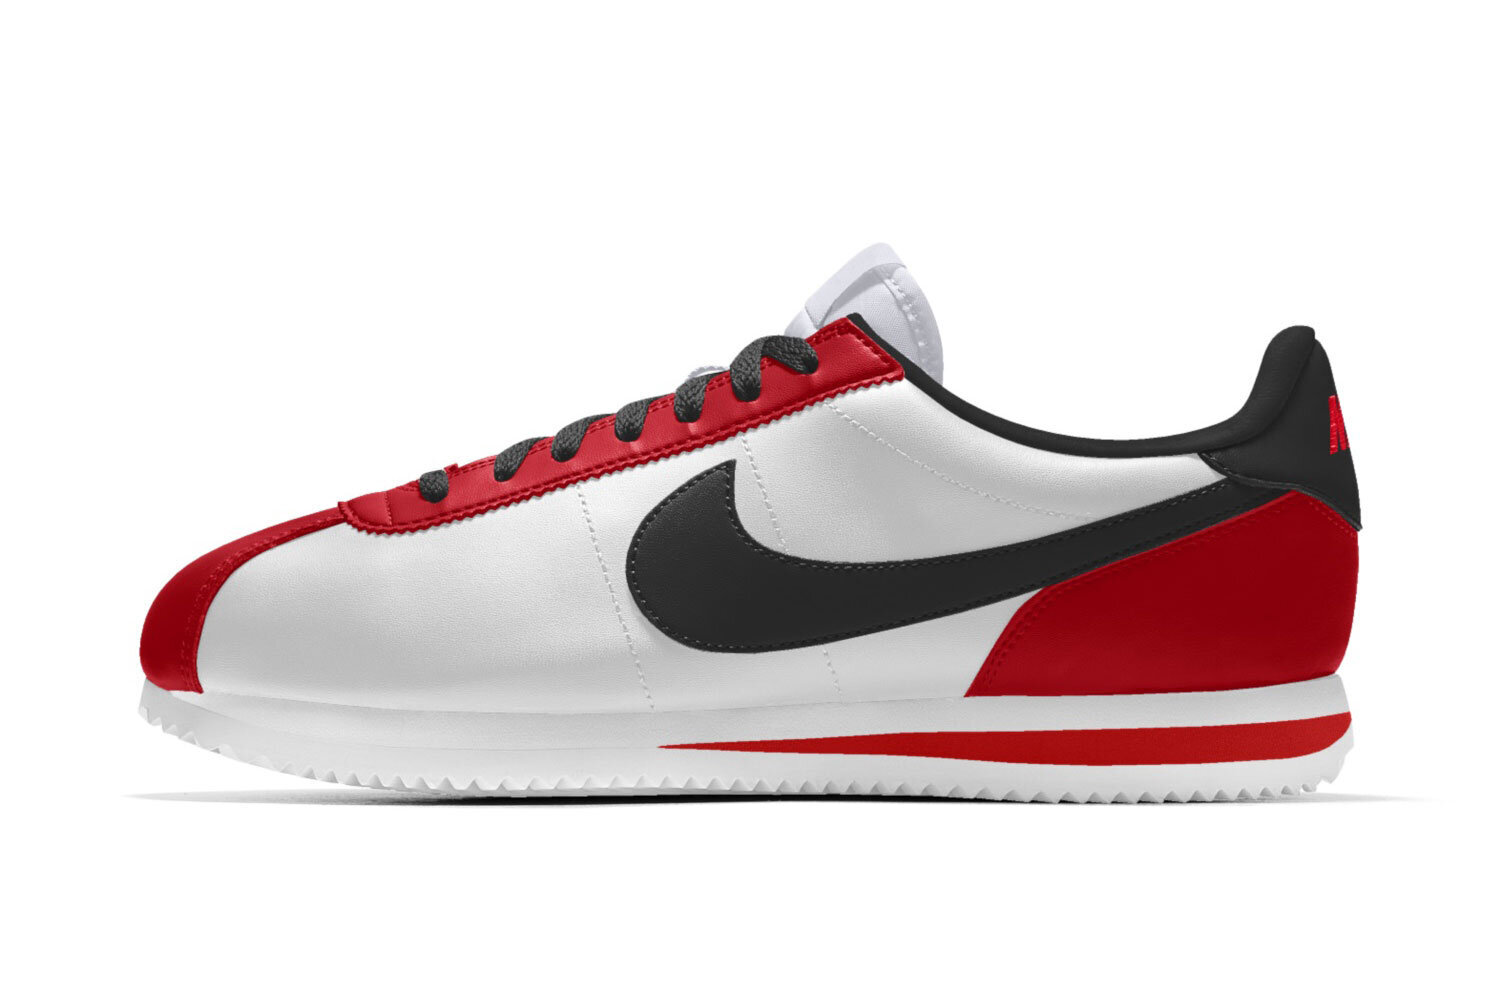 Storen Nauwkeurig Weg The Deffest®. A vintage and retro sneaker blog. — The Air Cortez is back ( kind of)